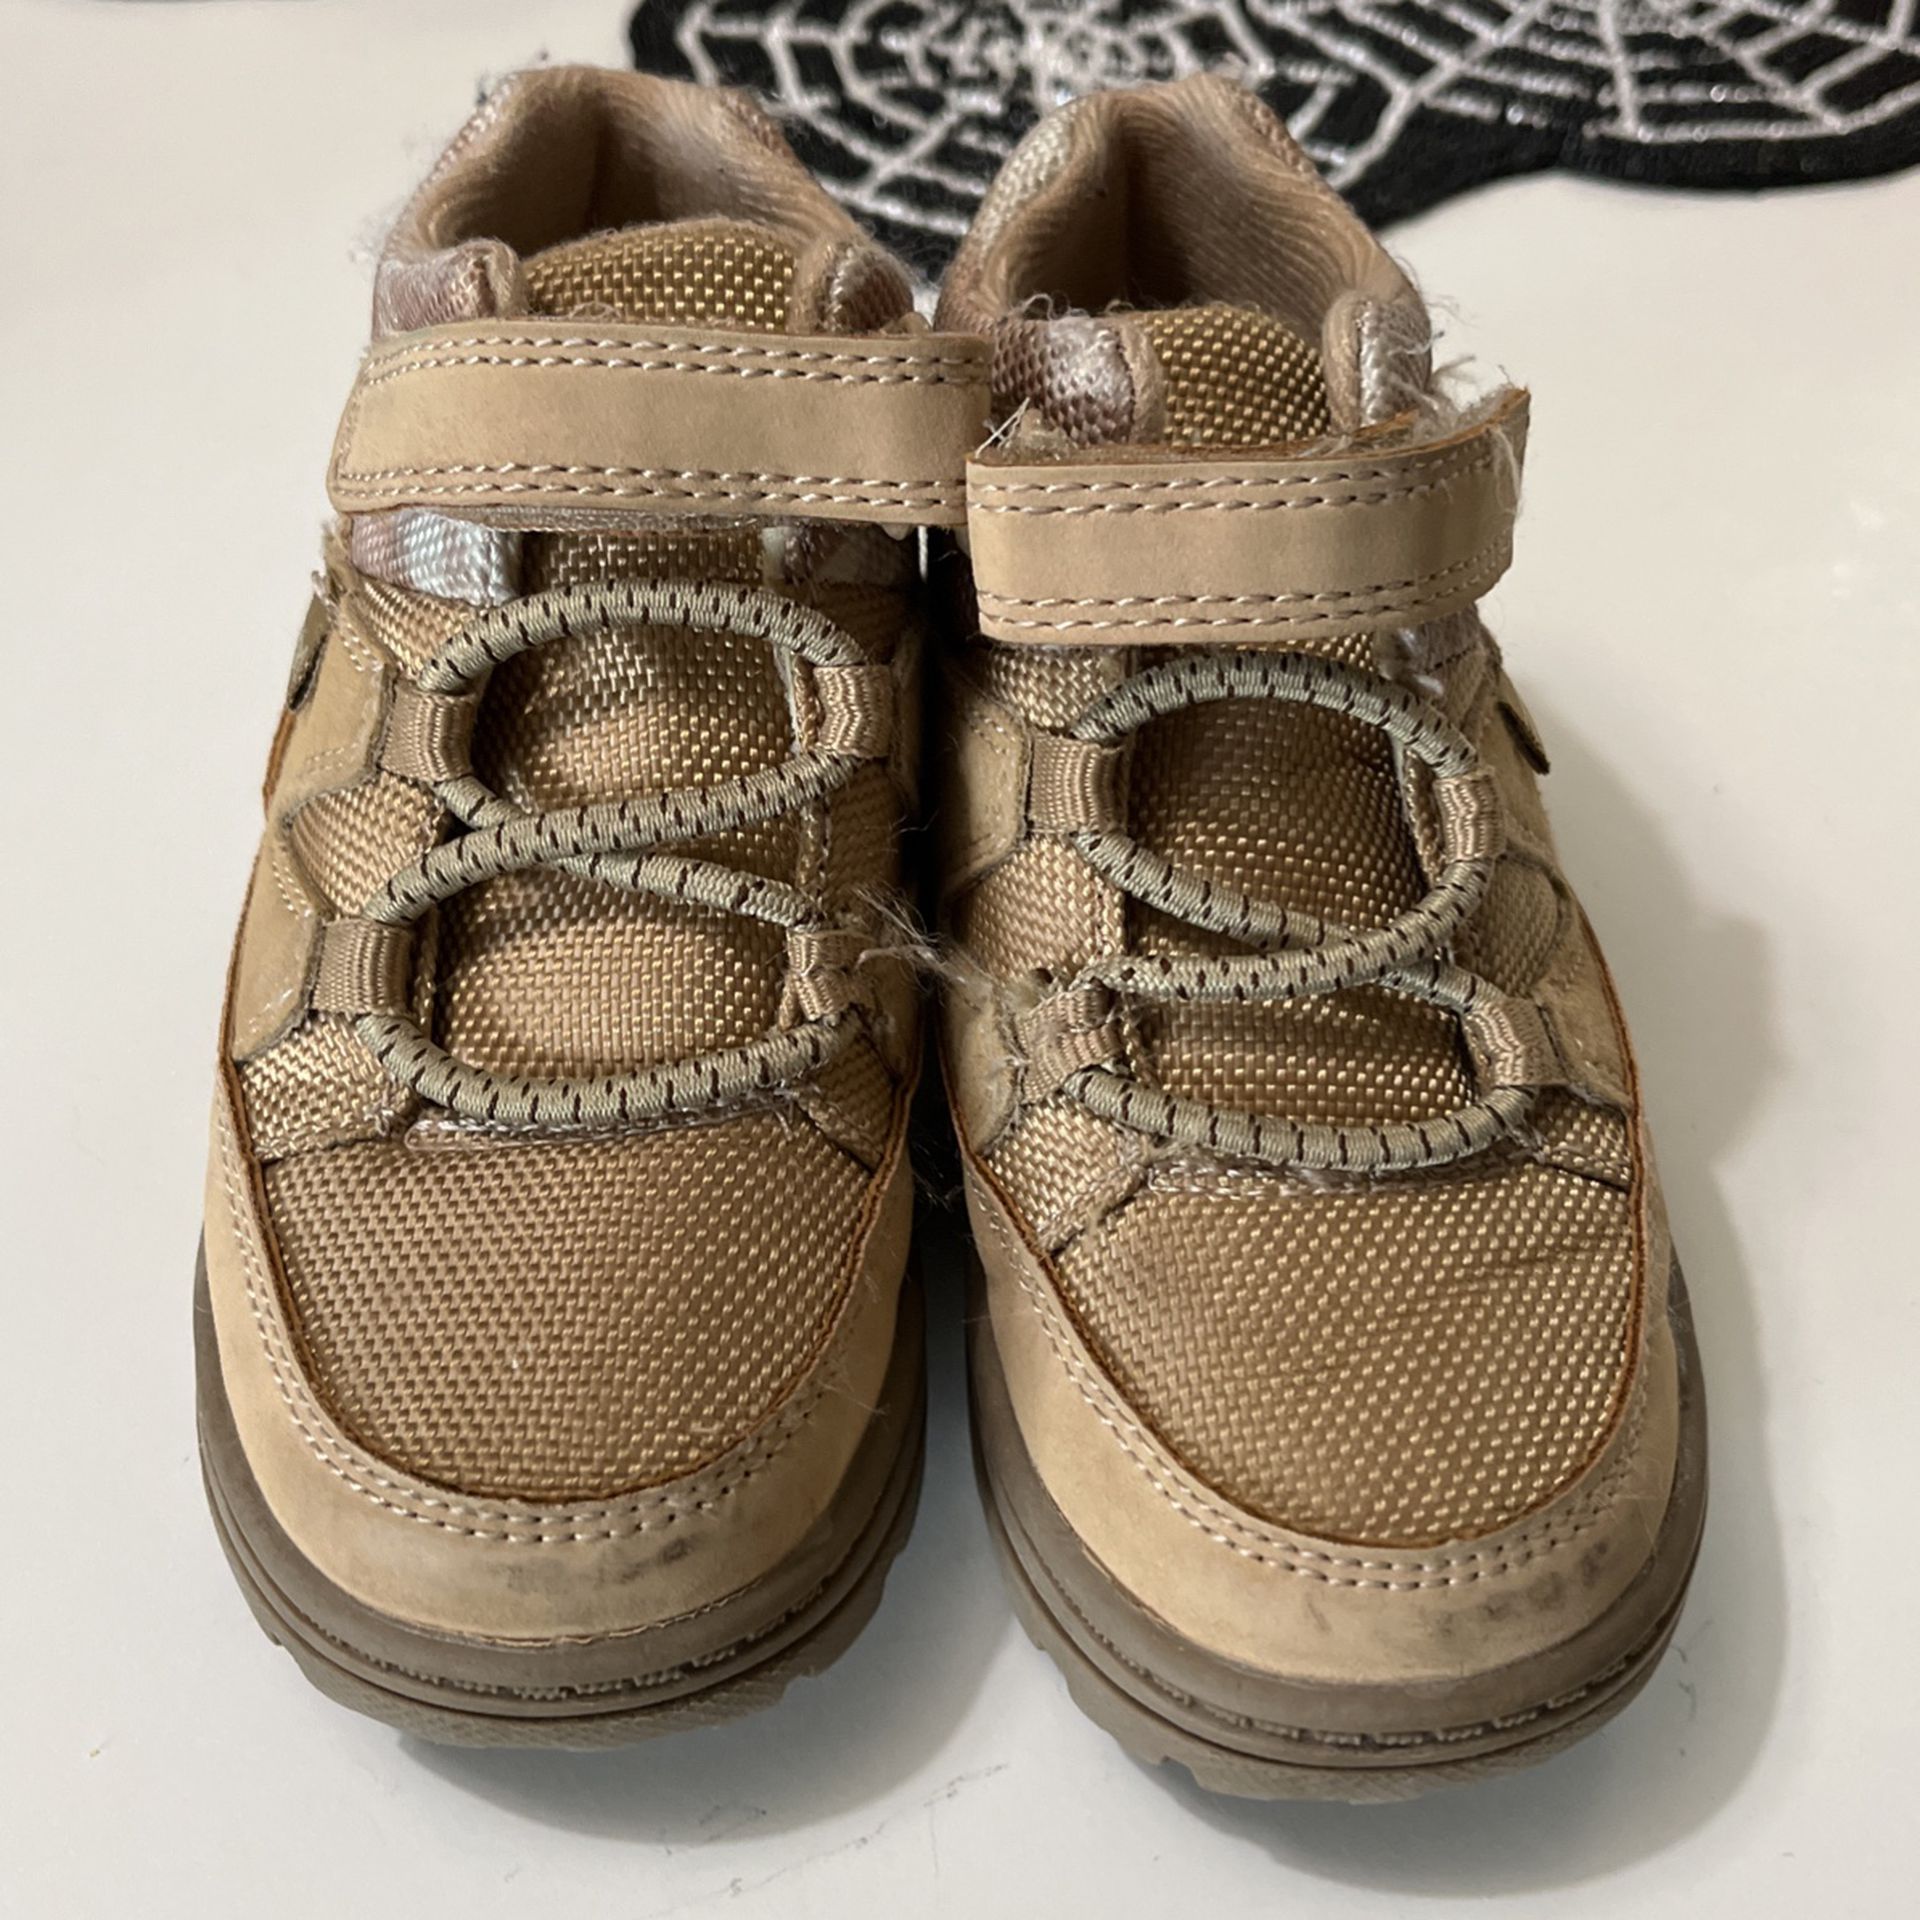 Boy Toddler Casual Boots